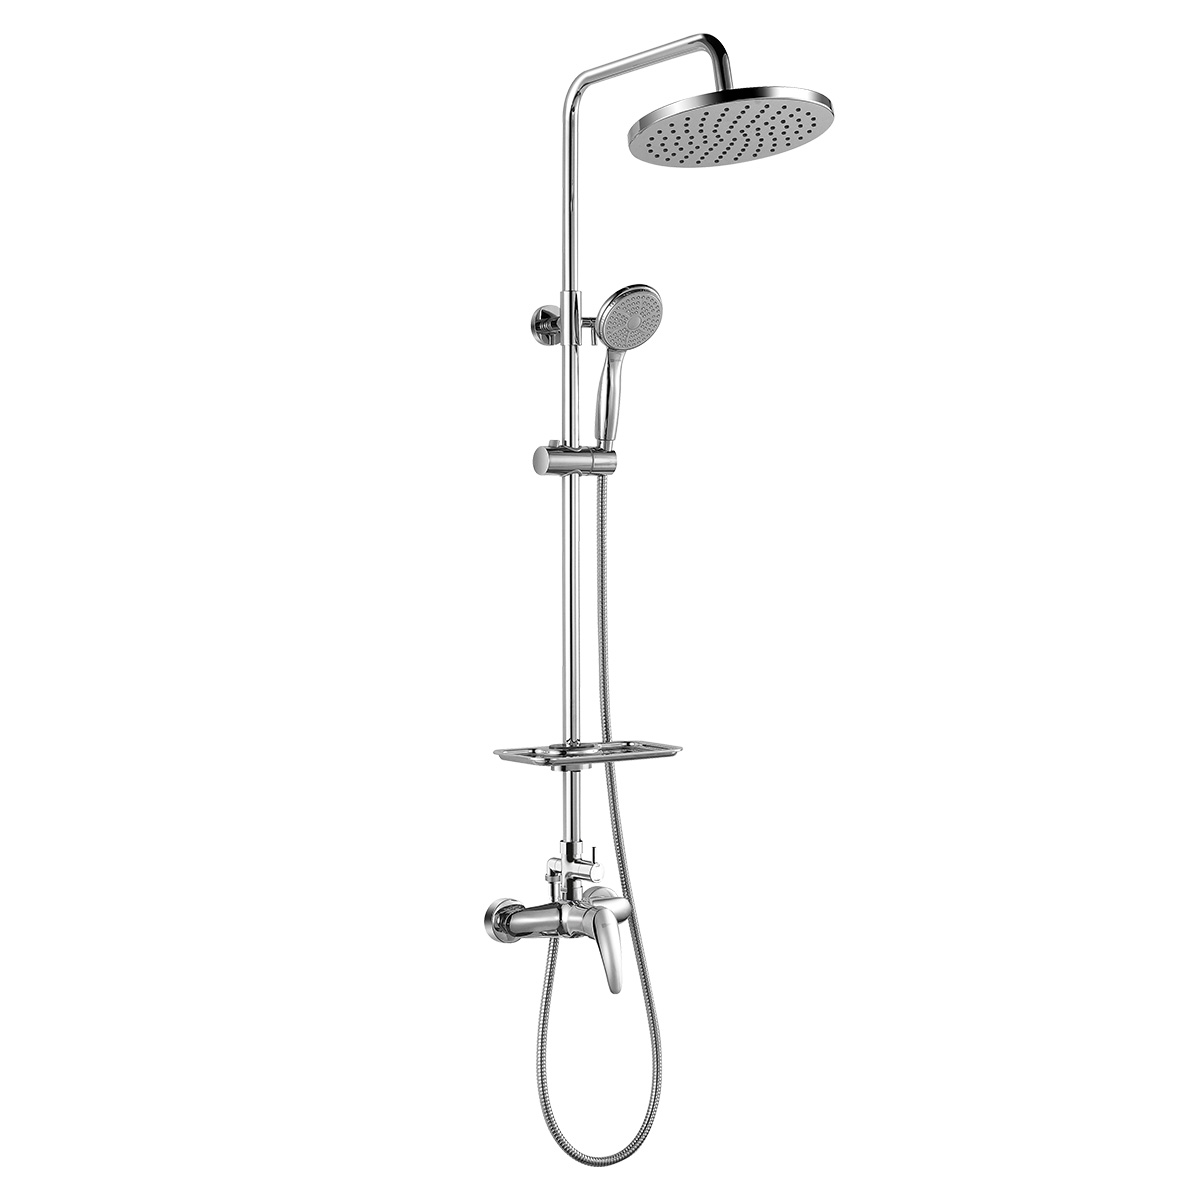 LM0460C Shower faucet with adjustable rod height and «Tropical rain» shower head